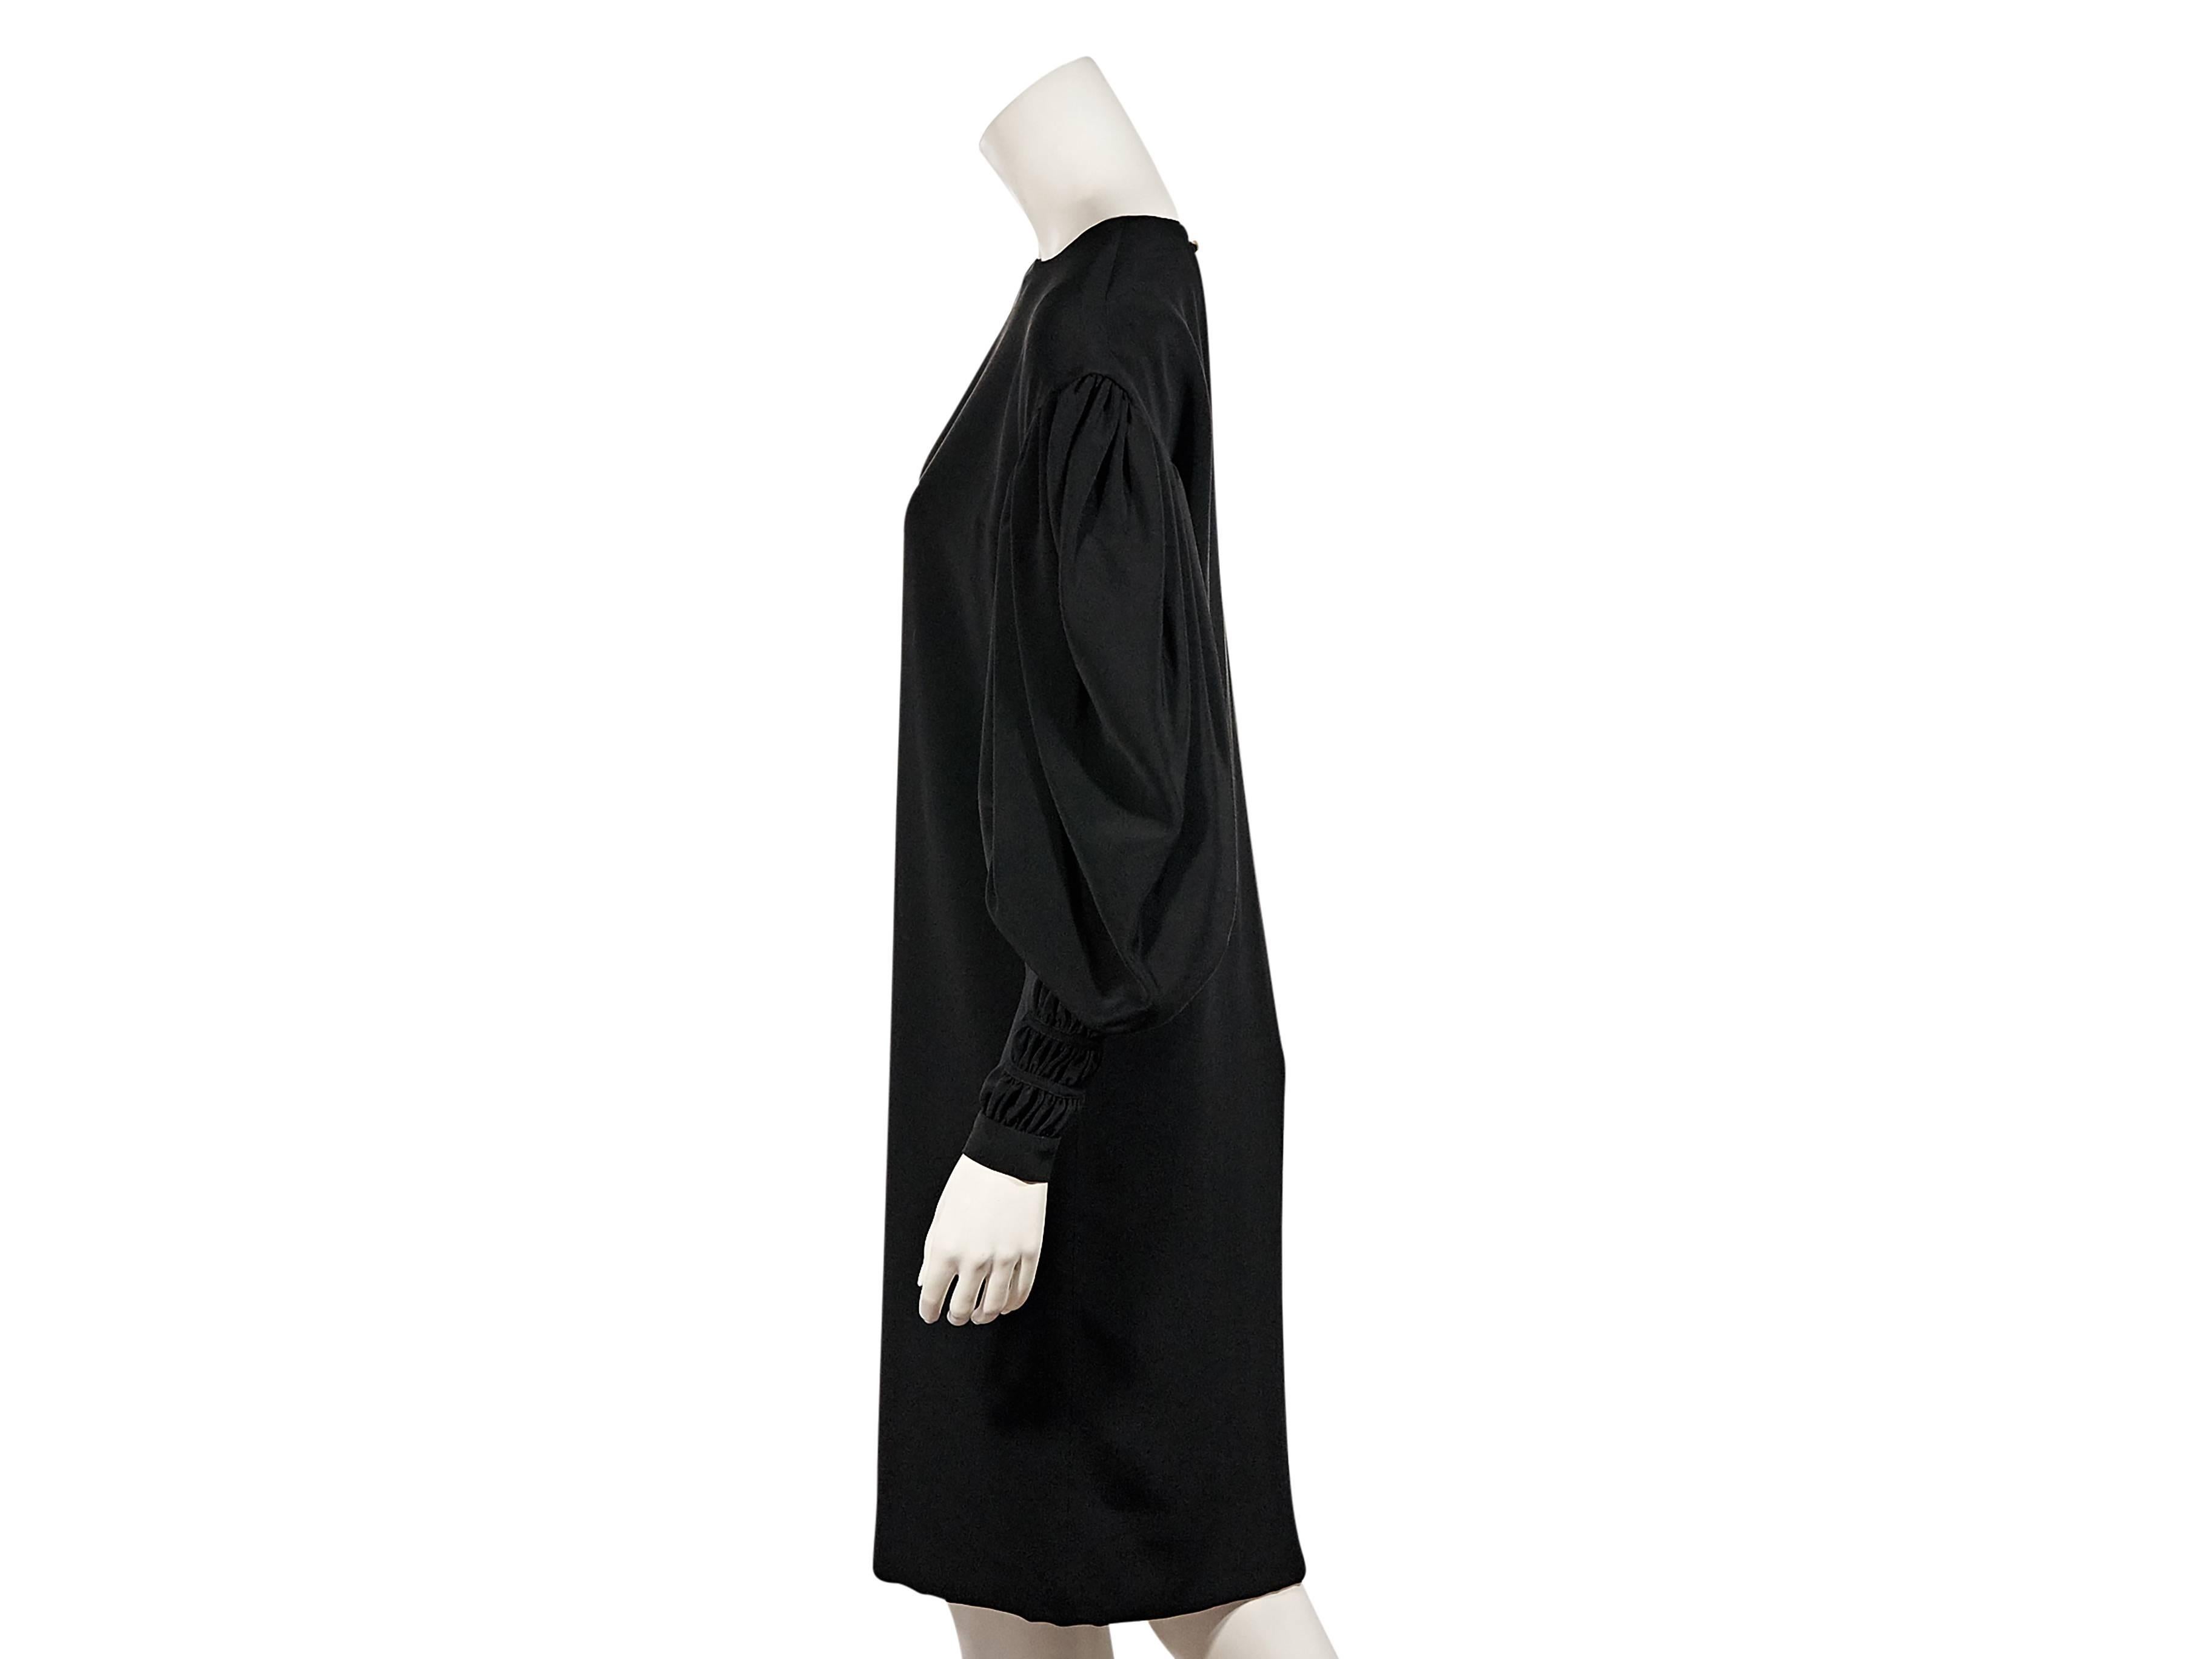 Product details:  Vintage black long-sleeve dress by Chanel.  Wide crewneck.  Long draped sleeves.  Ruched cuffs.  Back button closure.  Keyhole cutout.  Label size FR 38.
Condition: Excellent. 
Est. Retail $ 2,488.00